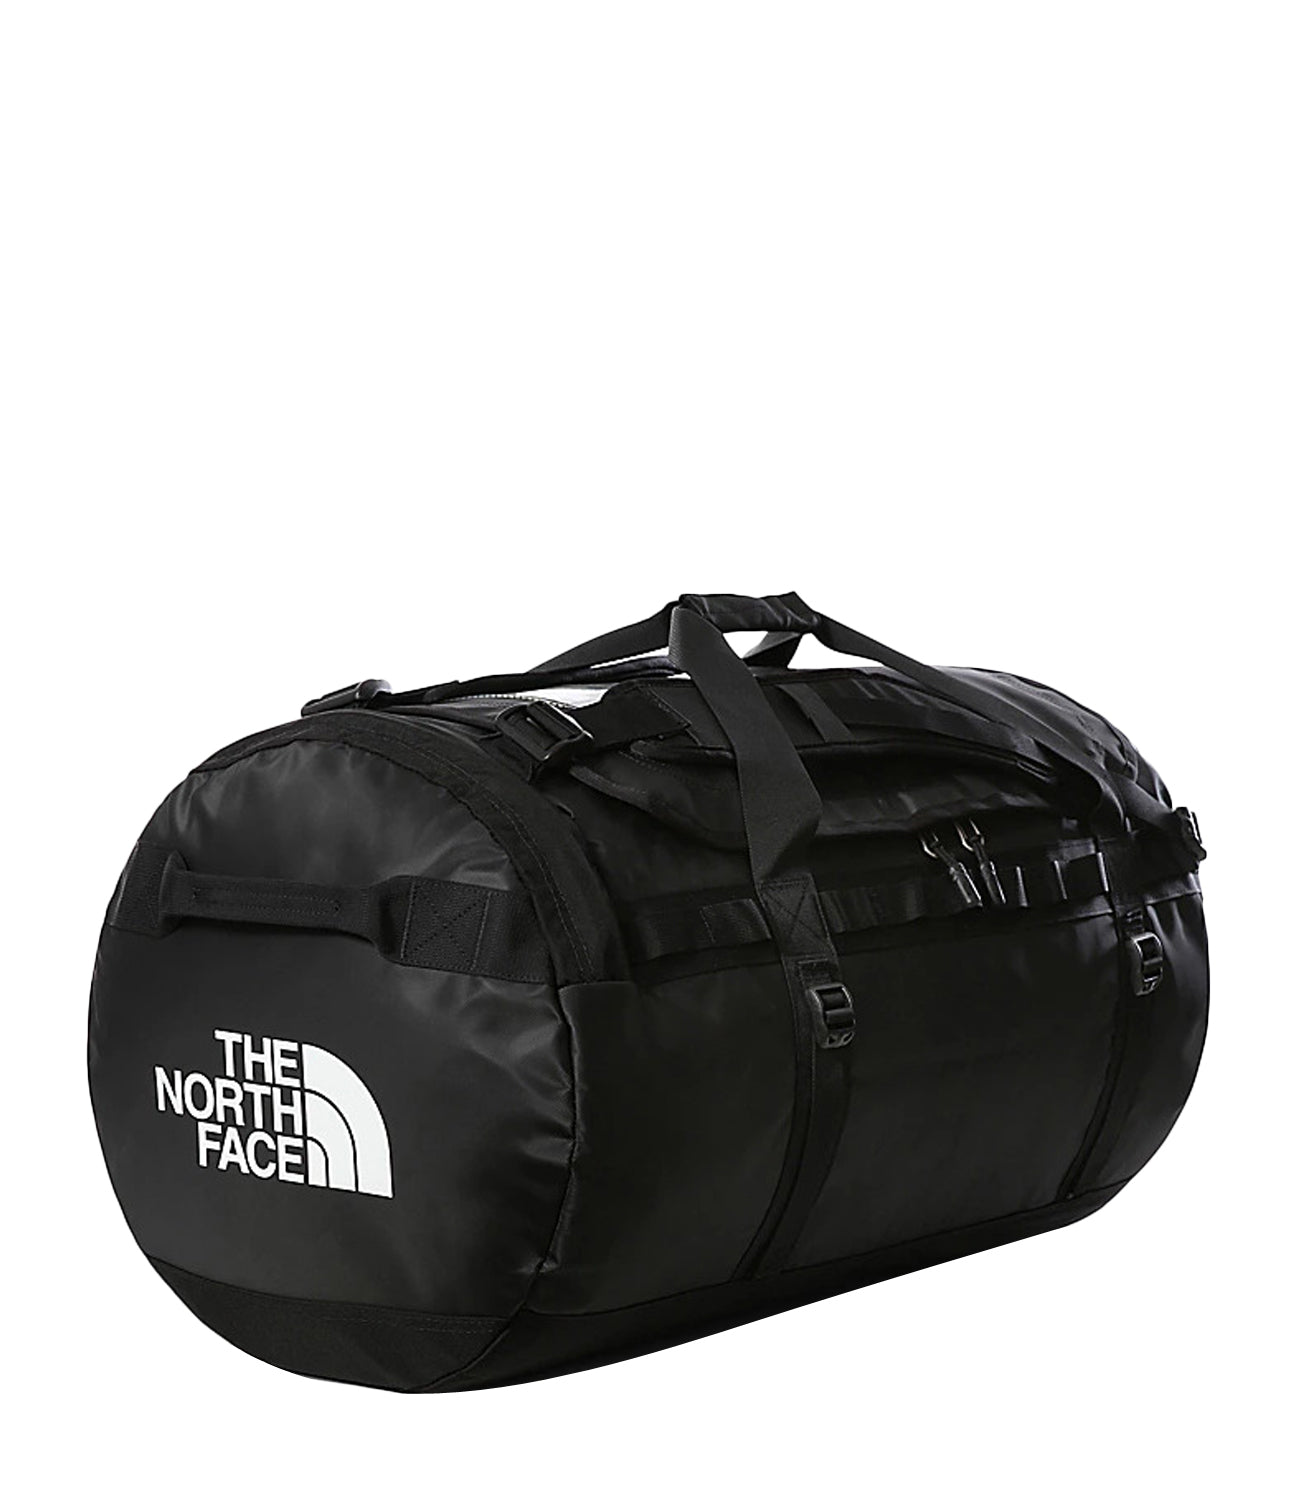 The North Face | Black and White Travel Bag